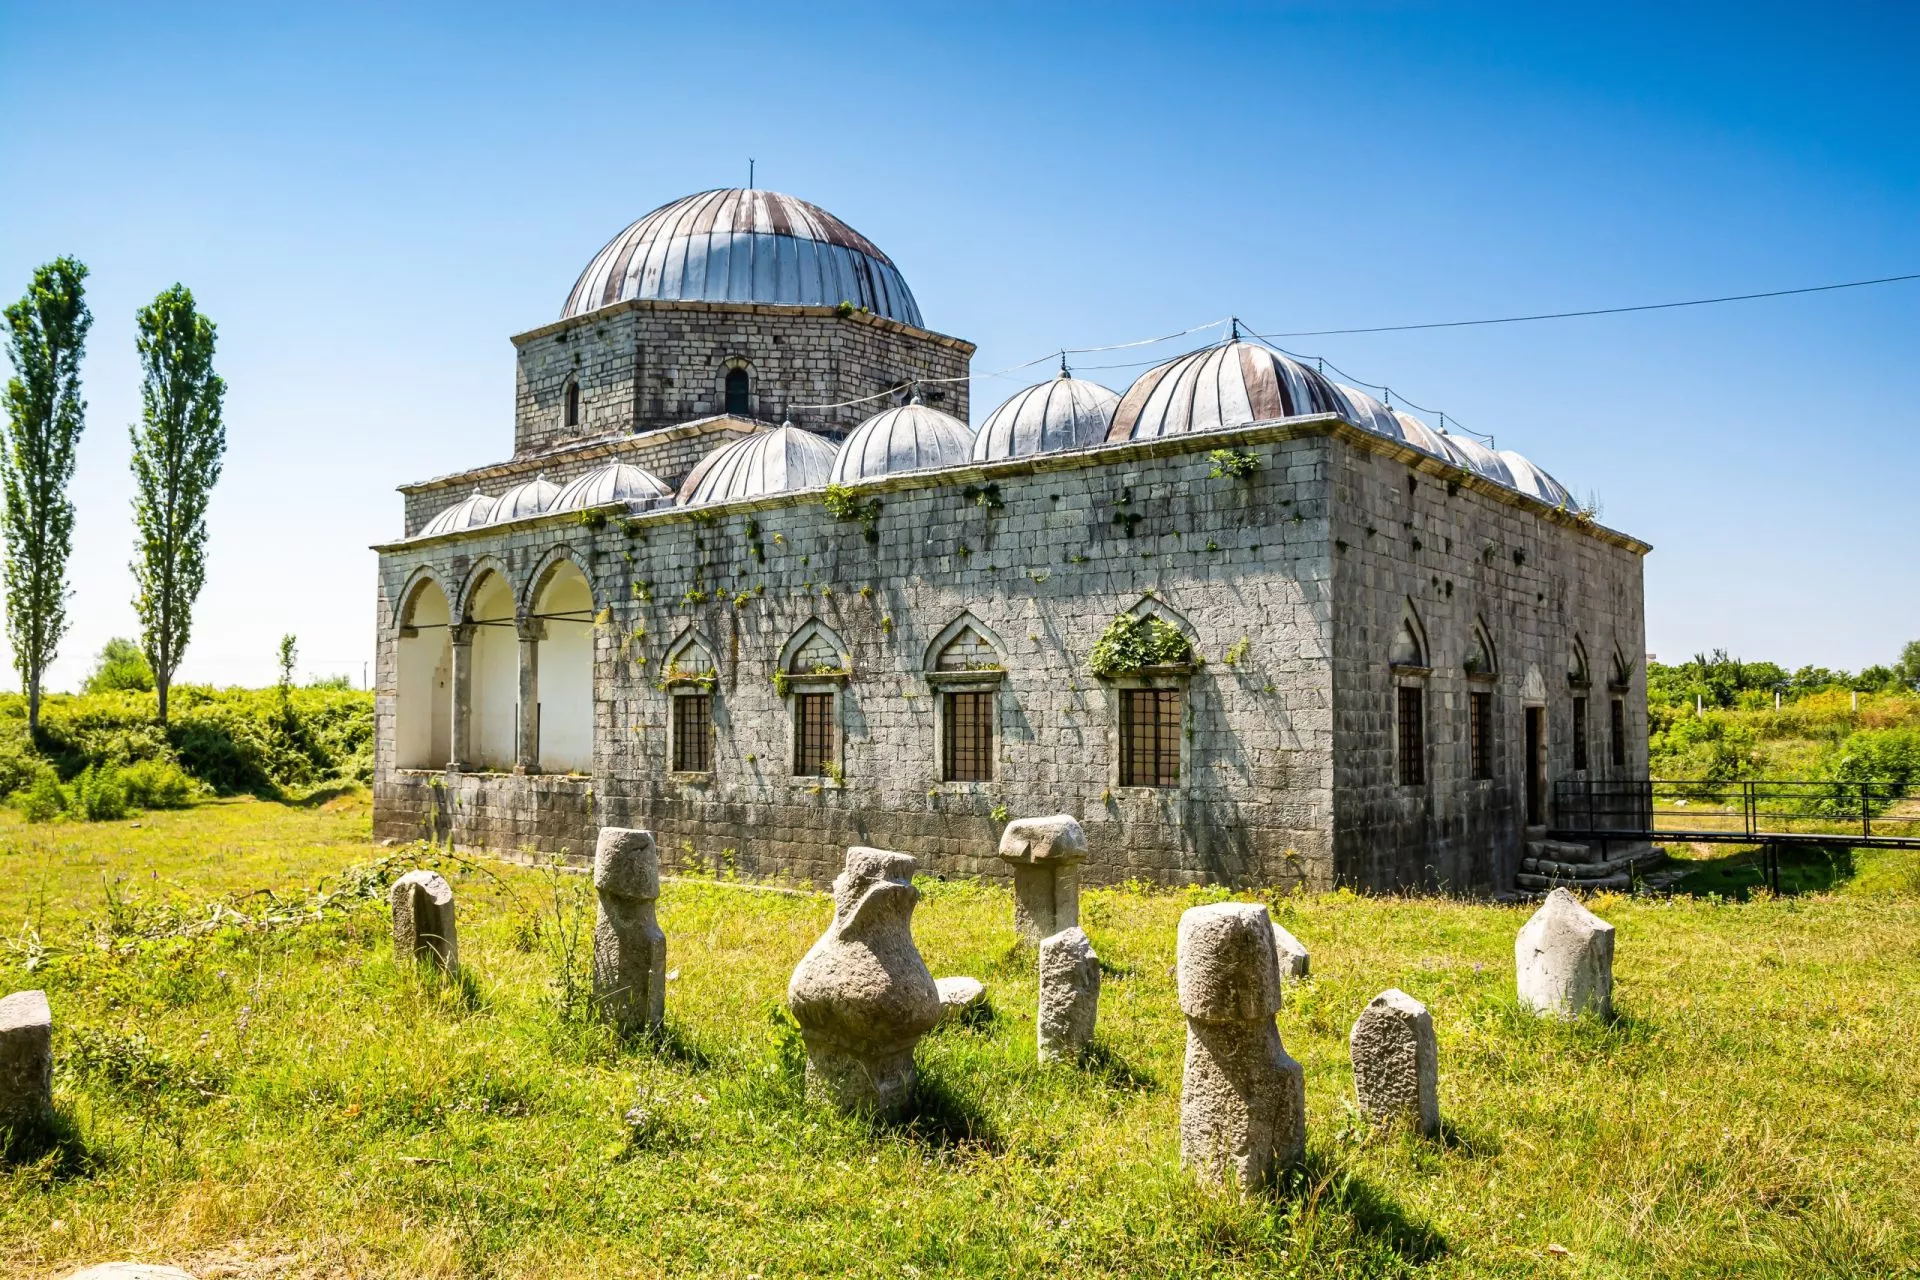 Lead Mosque also known as the Busatli Mehmet Pasha Mosque, is a historical mosque in Shkoder